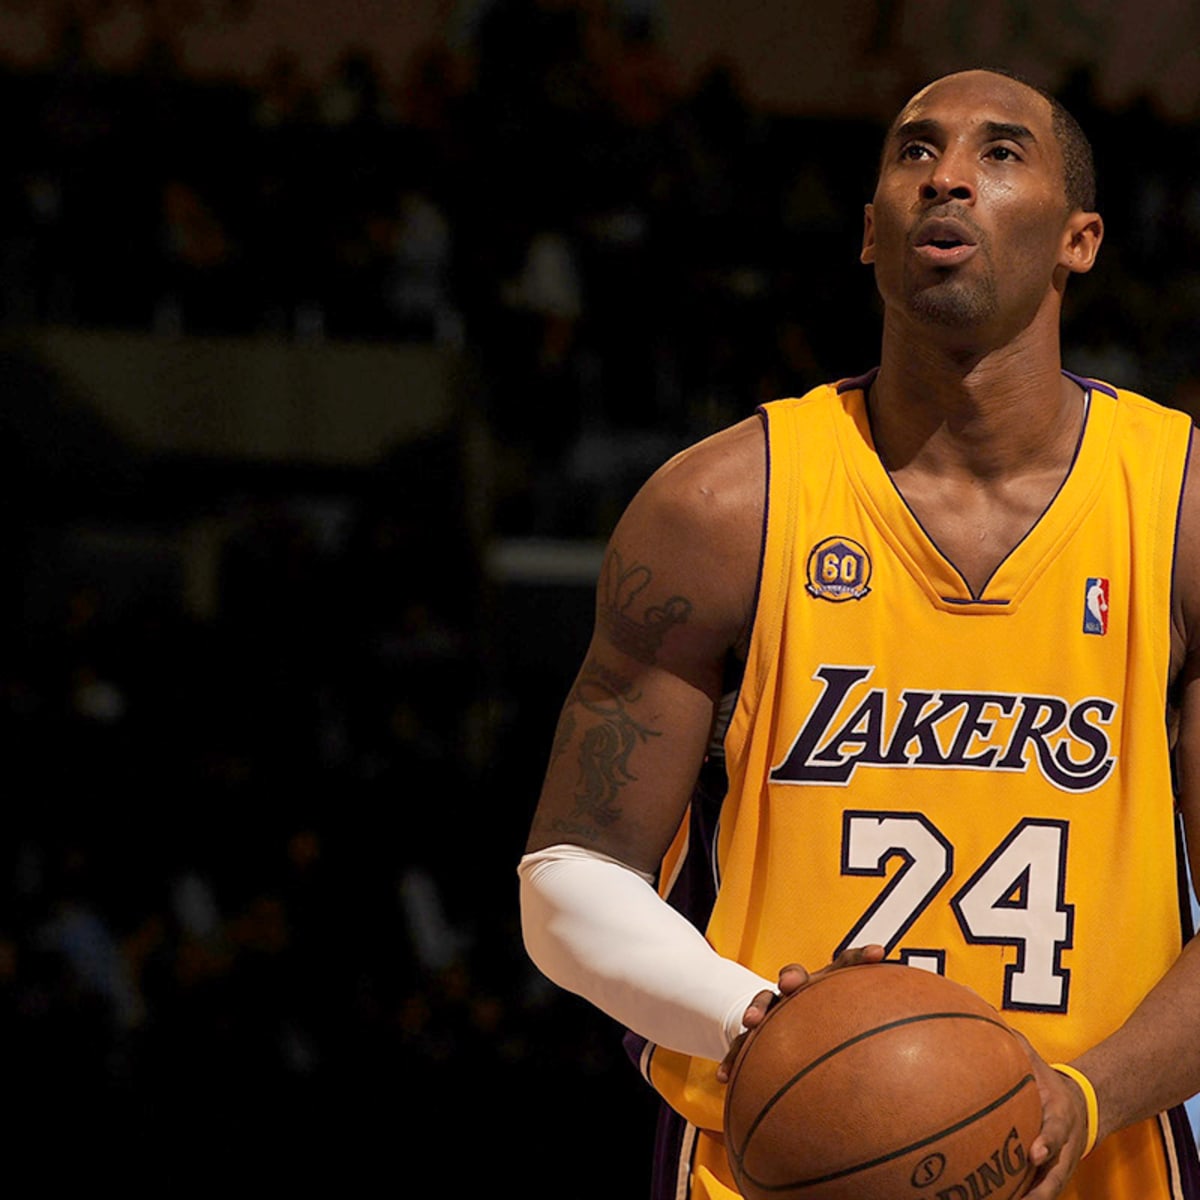 LA Lakers' Kobe Bryant misses second consecutive game with back